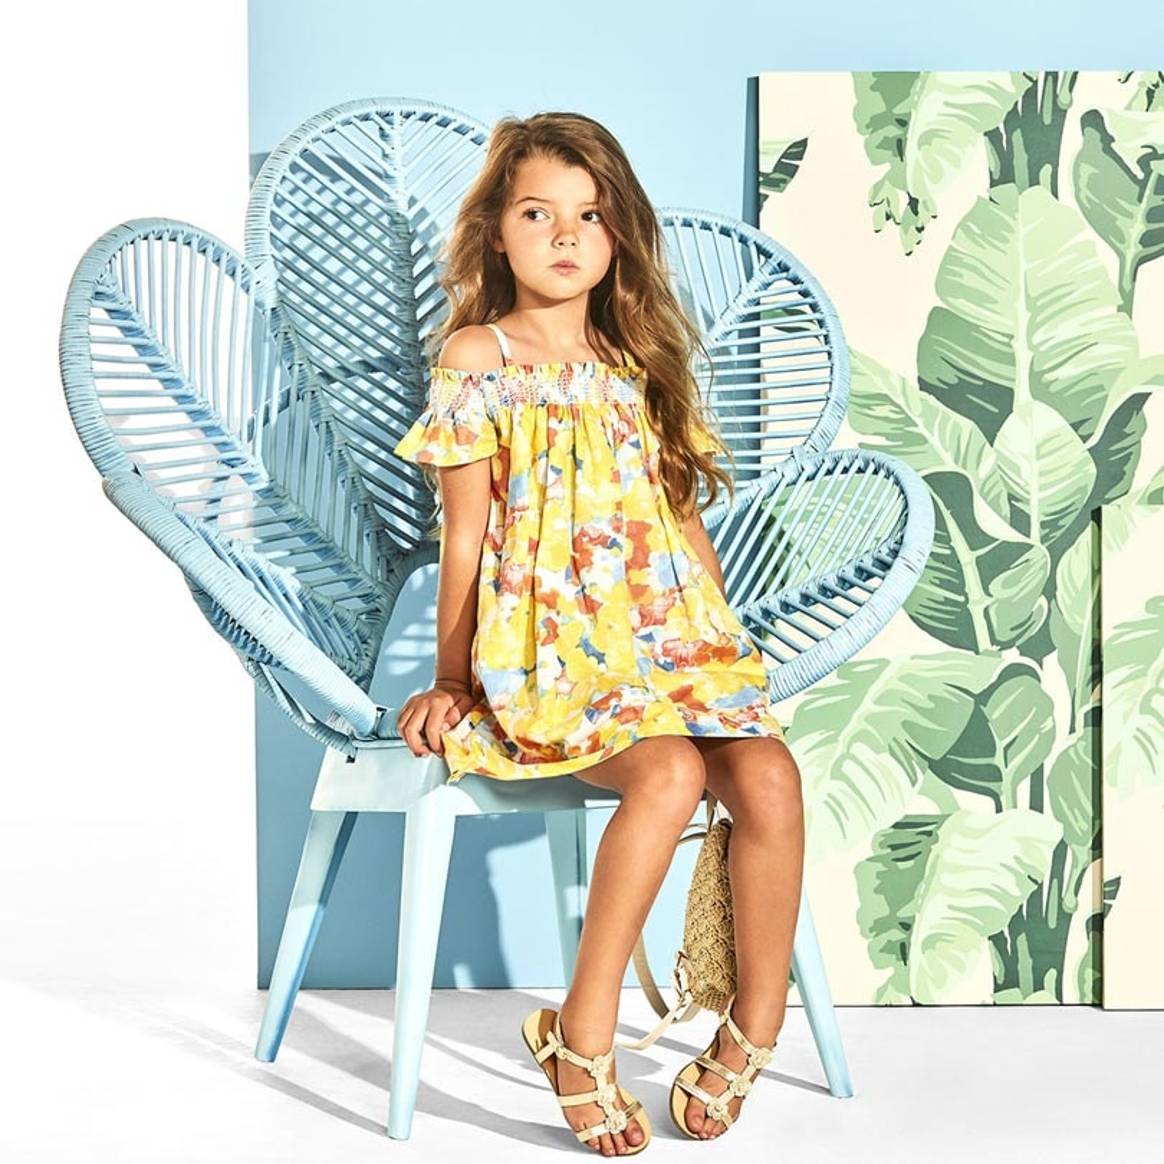 Janie and Jack teams up with Aerin Lauder